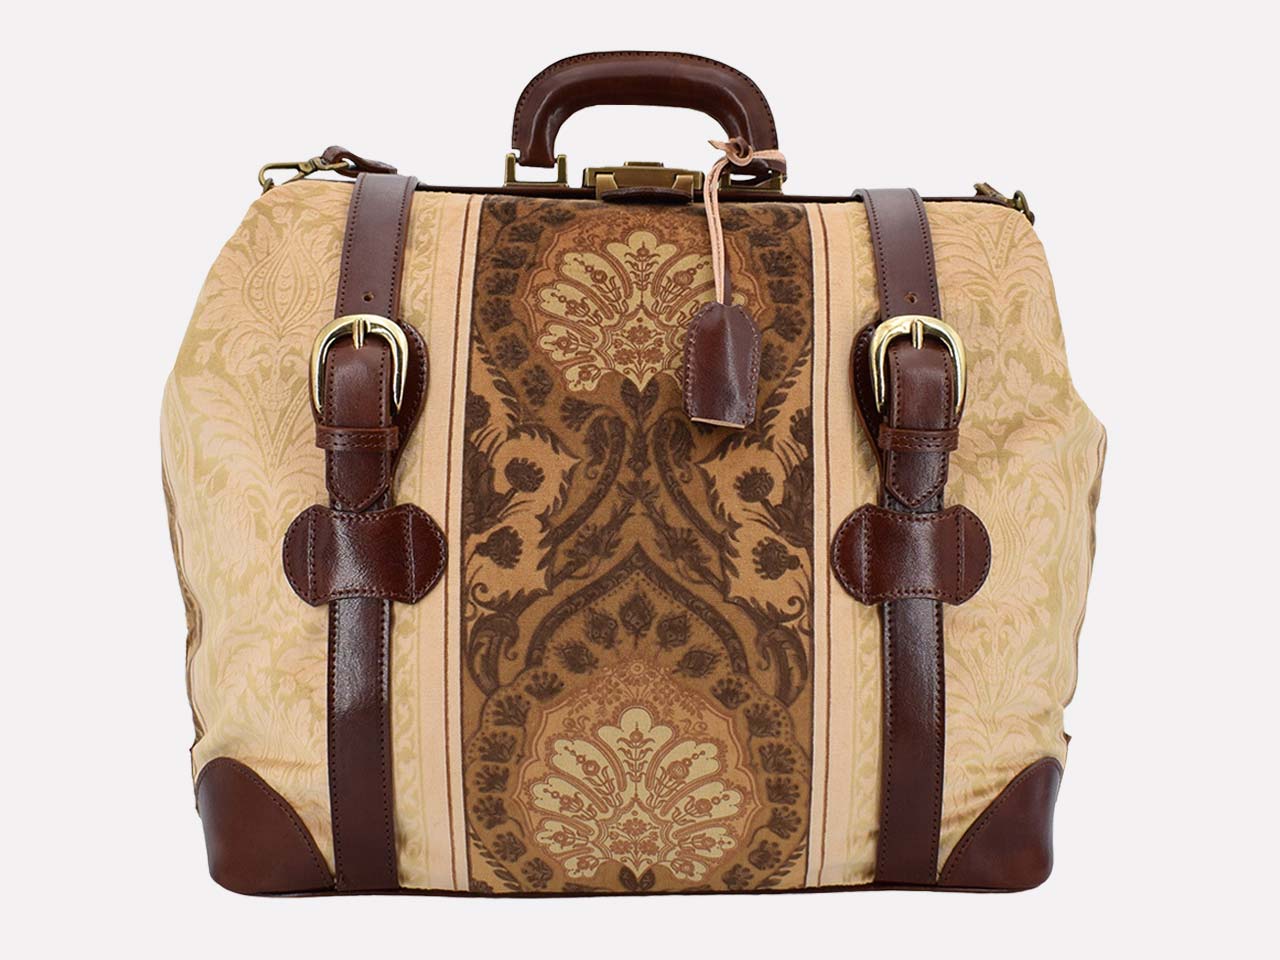 Felicitas, Italian leather travel bag designed and handcrafted in Rome by Riccardo Mancini